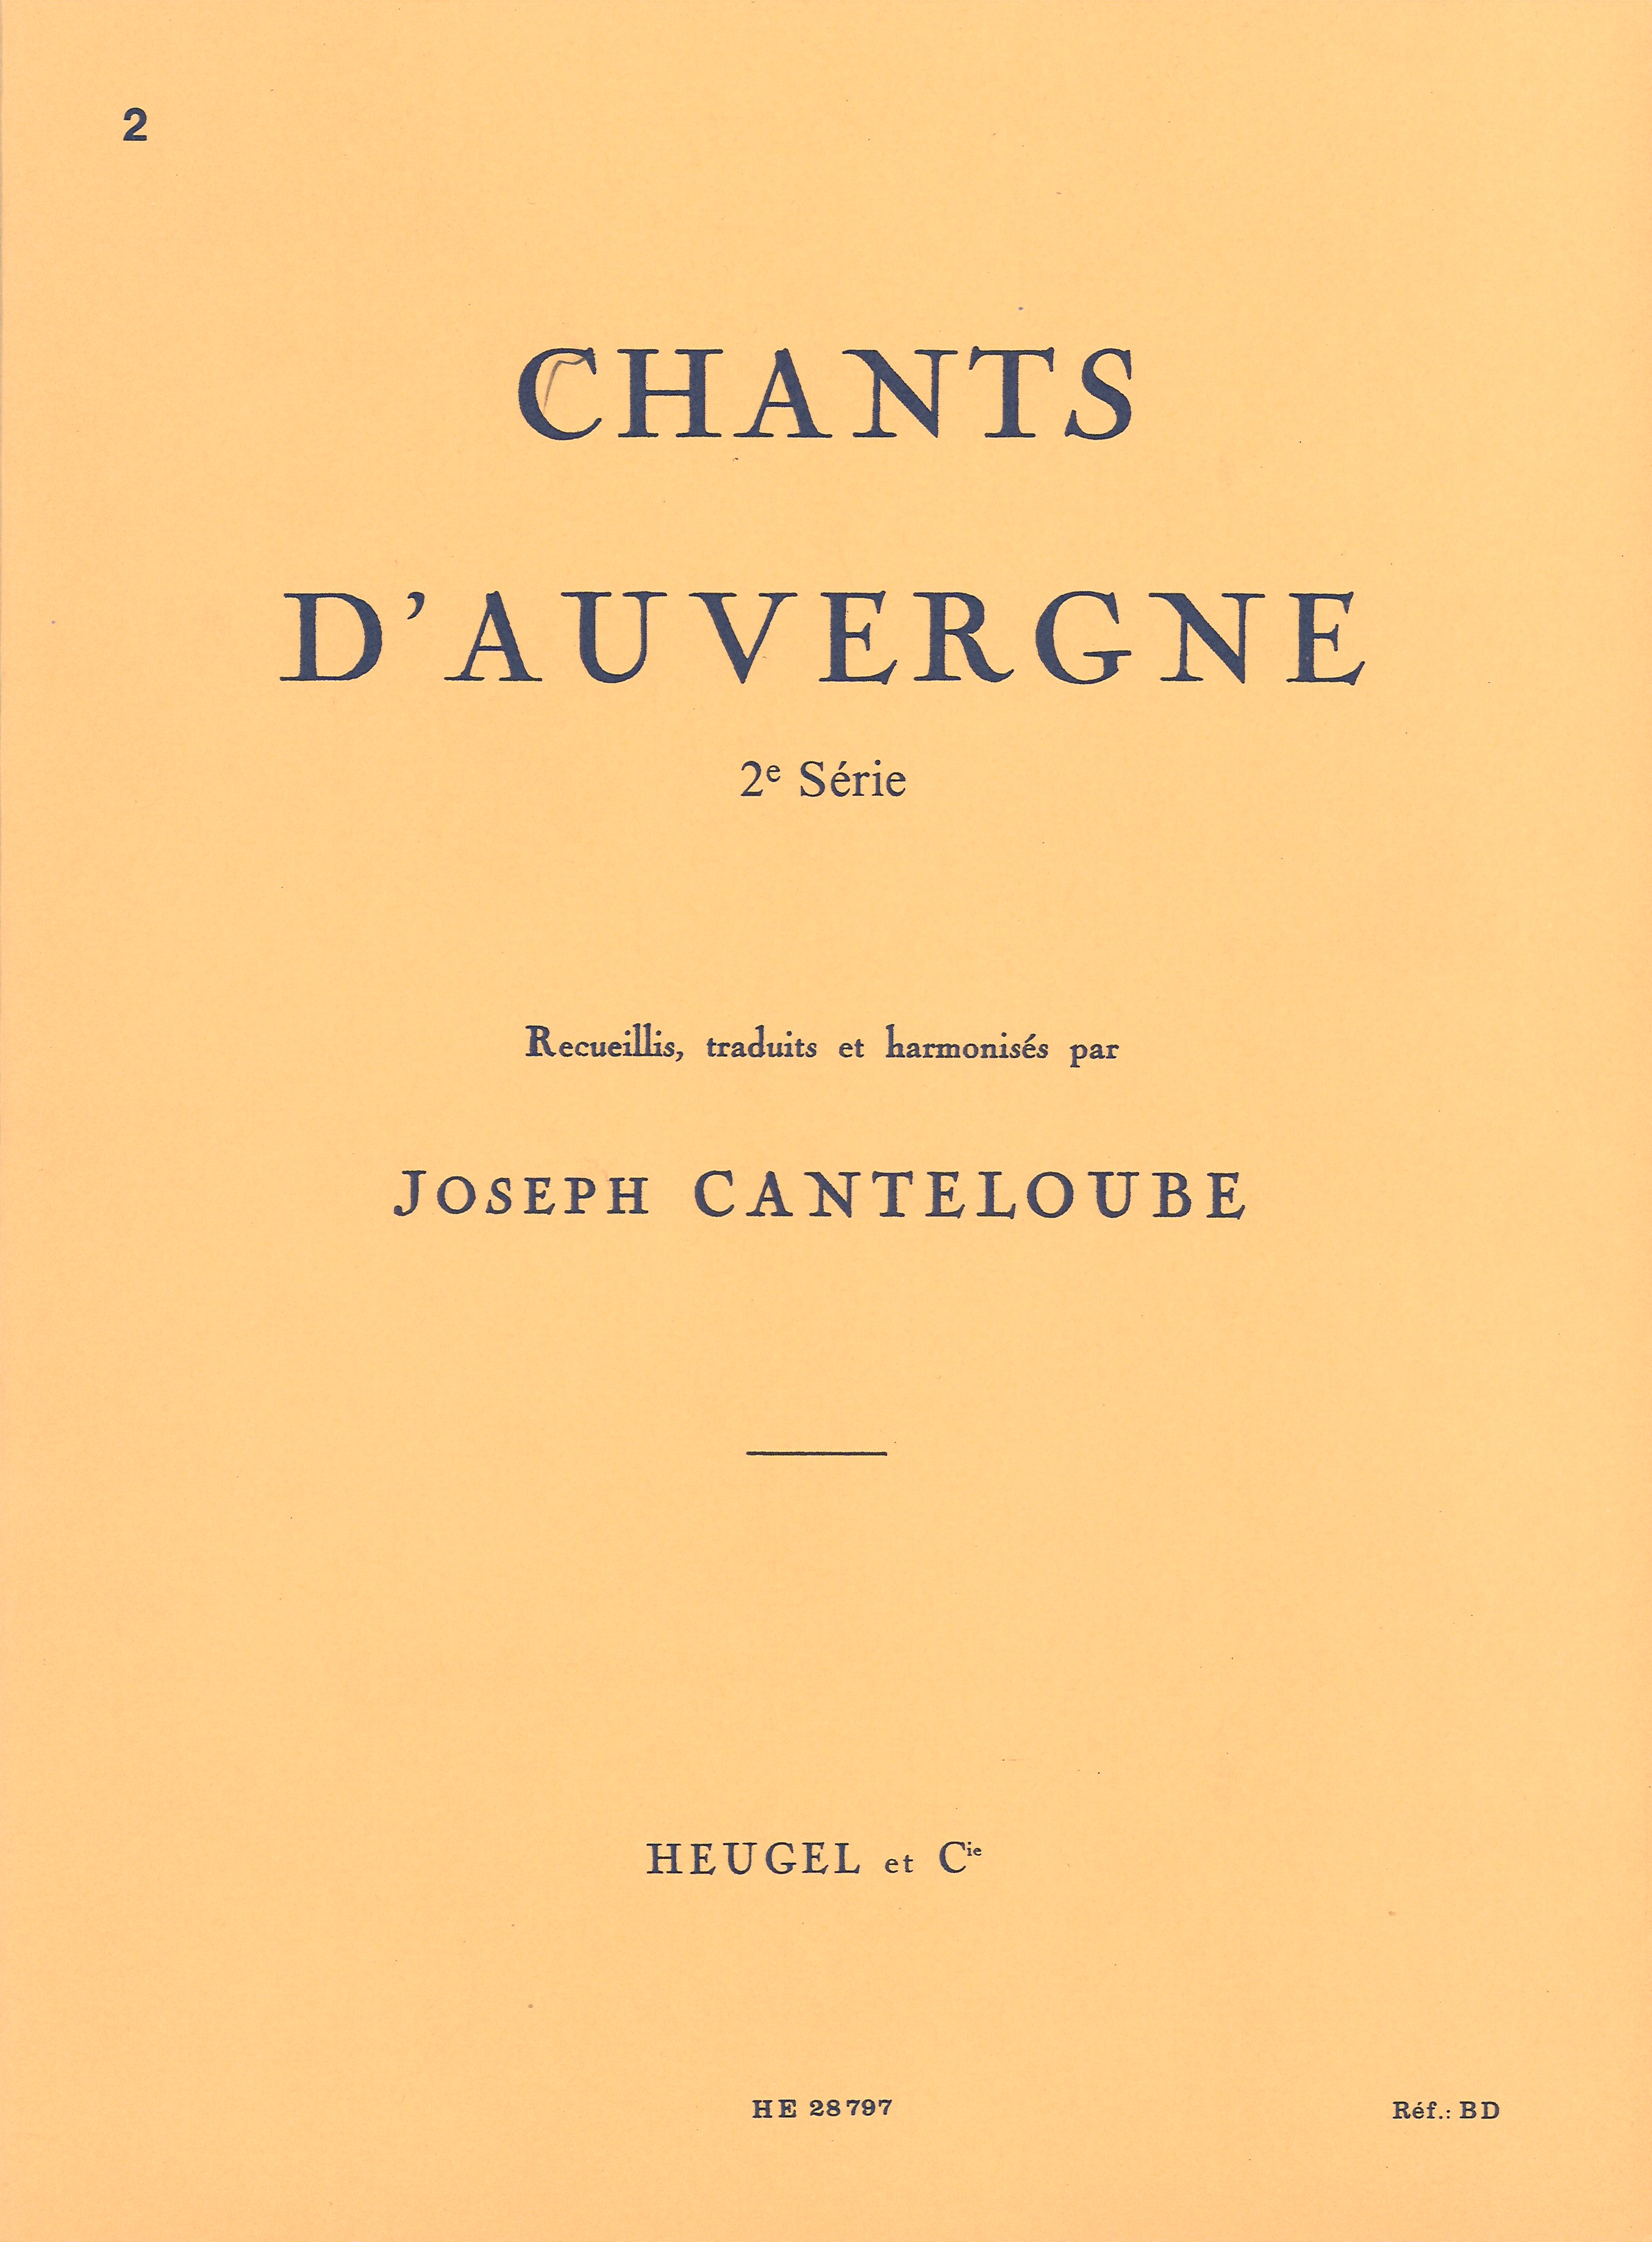 Canteloube Chants D Auvergne Vol 2 Voice & Piano Sheet Music Songbook